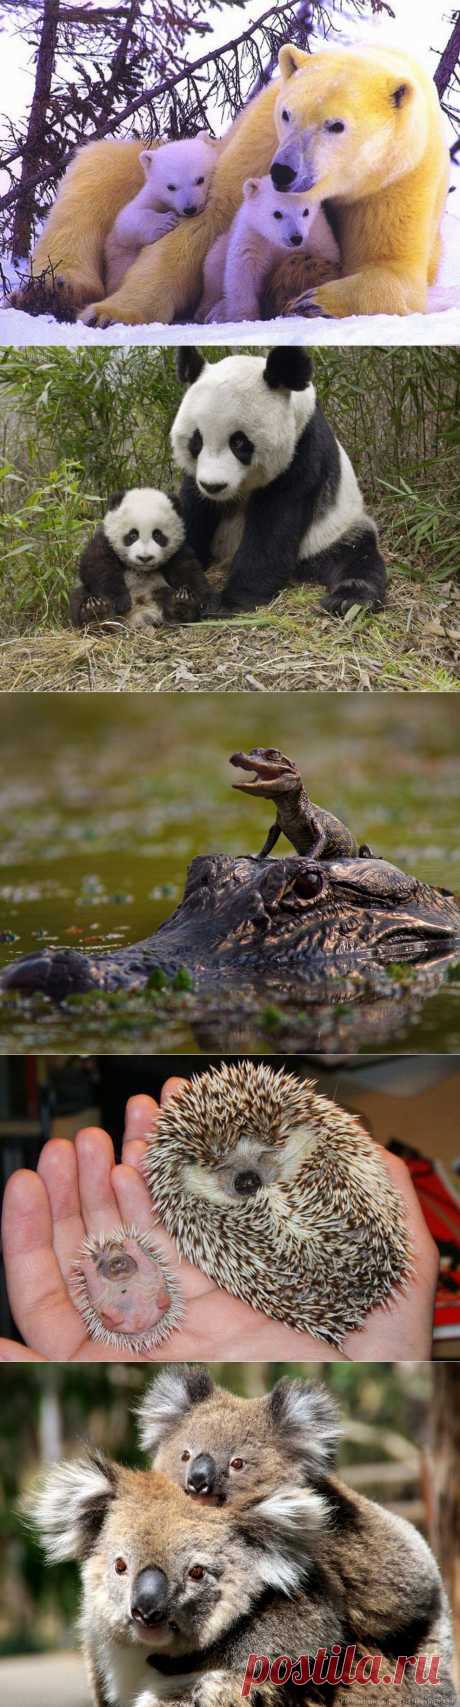 Omigu » Animals with their Cute little Babies